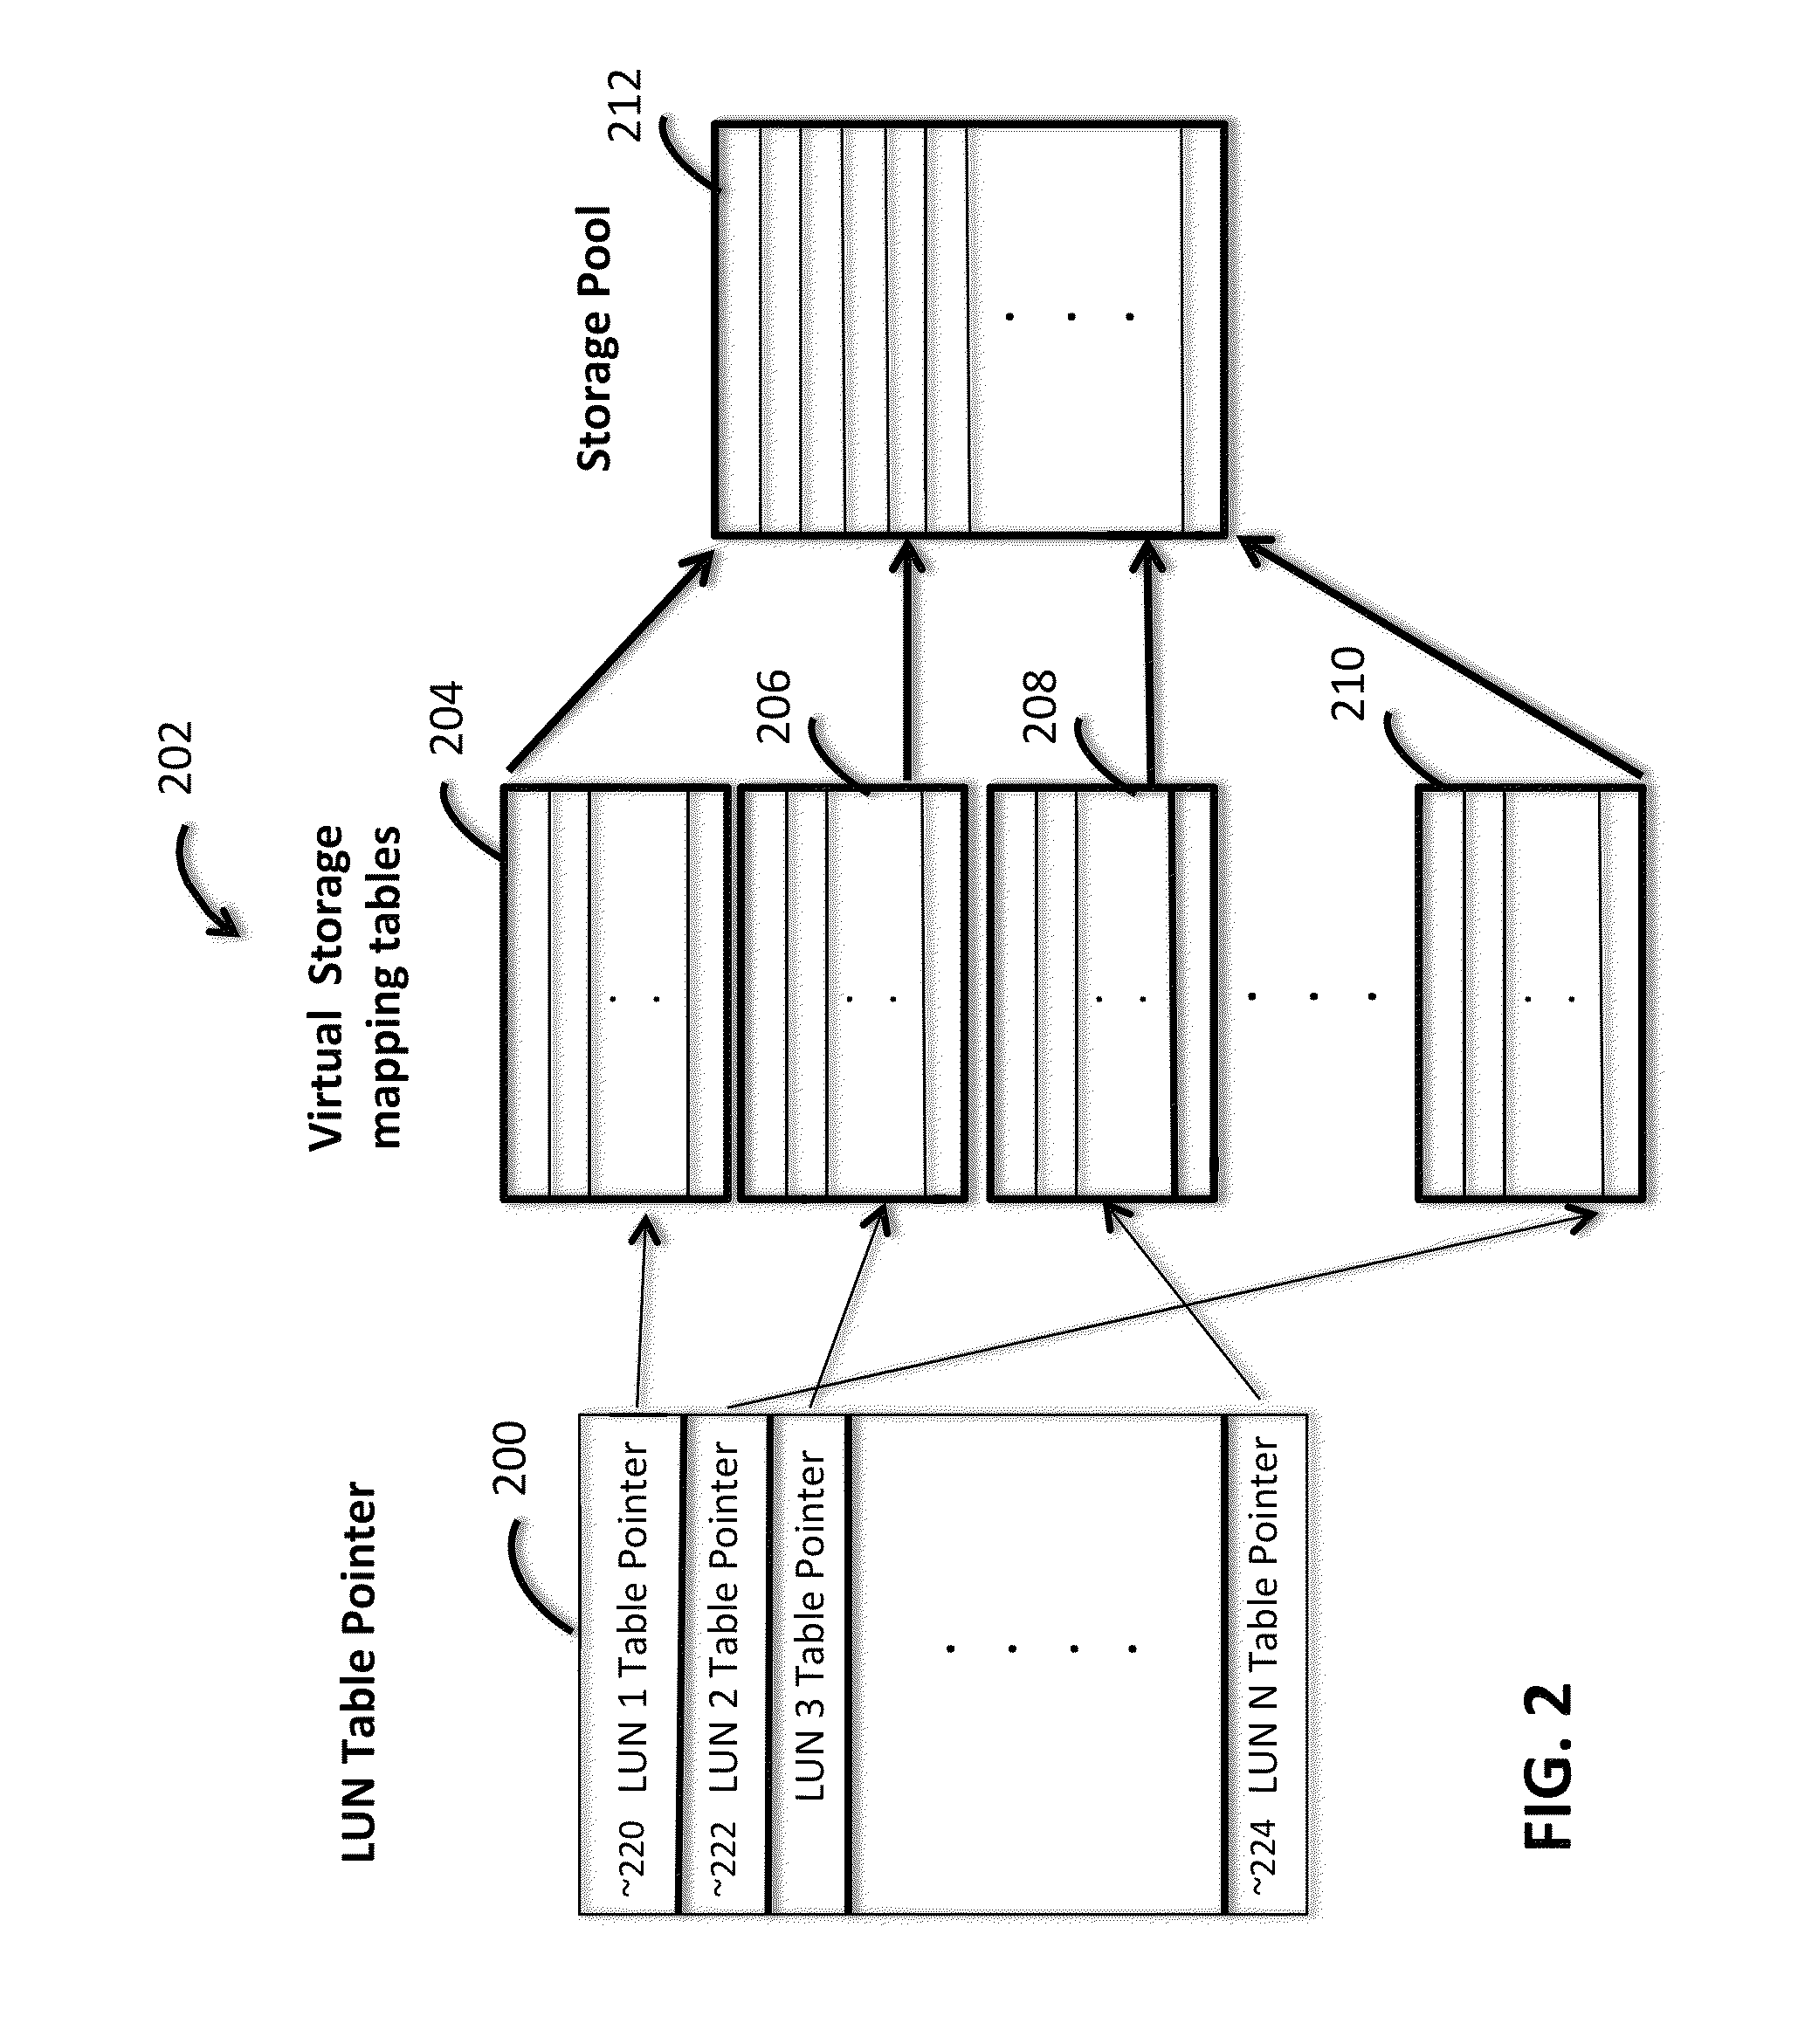 Method of thin provisioning in a solid state disk array